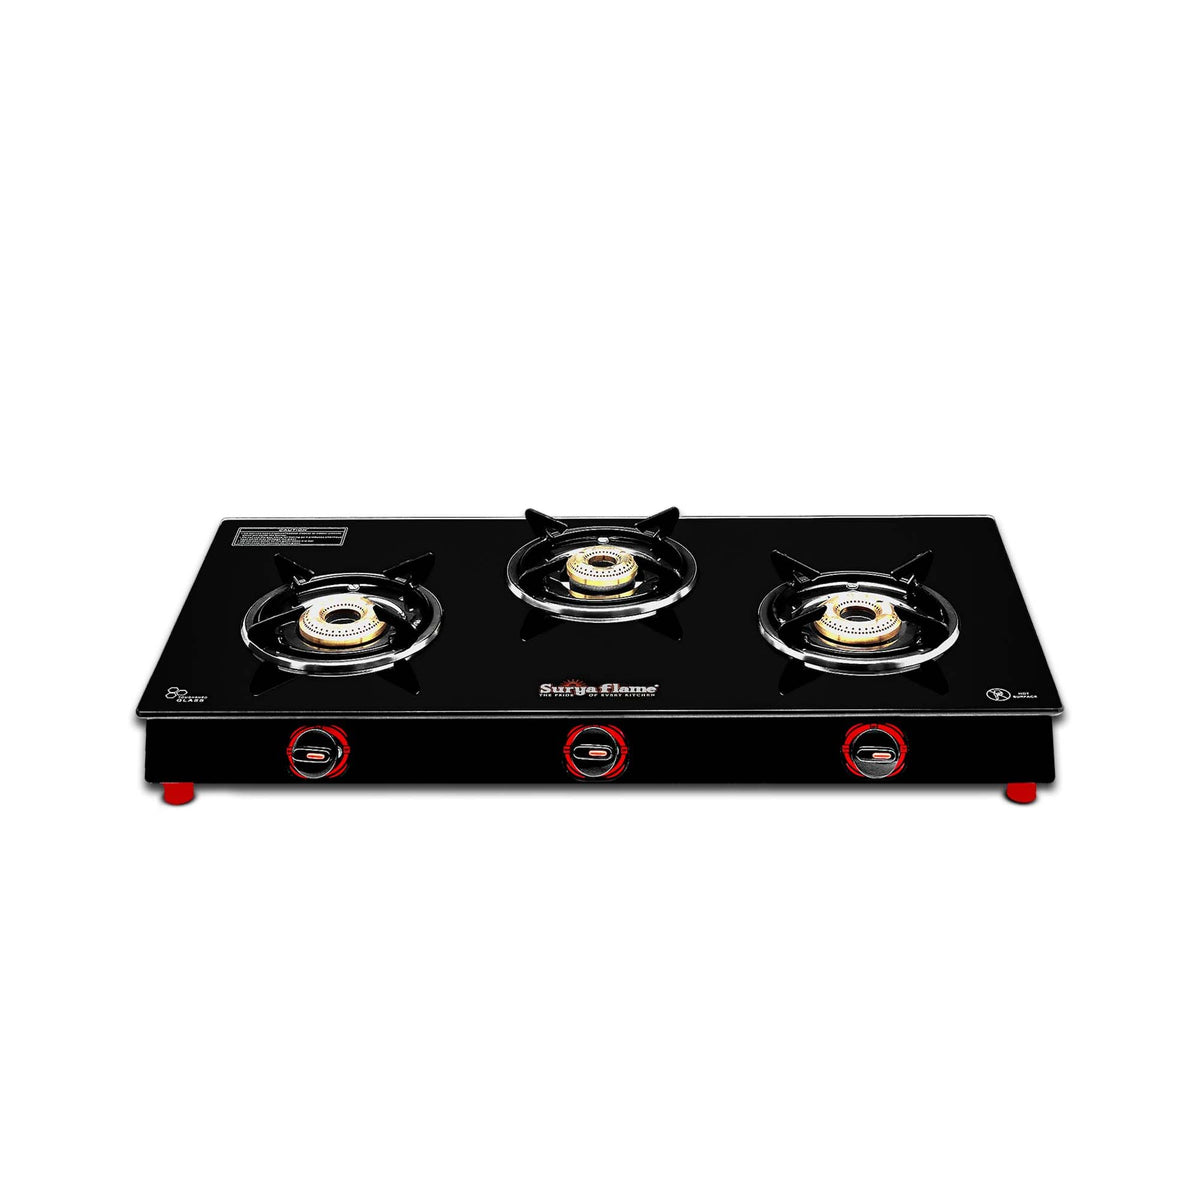 Surya Flame Smart 3 Brass Burner Glass Top chulha Black Manual Ignition India's First PNG Gas Stove, ISI Certified Direct Pipeline Gas 2-Year Doorstep Warranty Including Glass